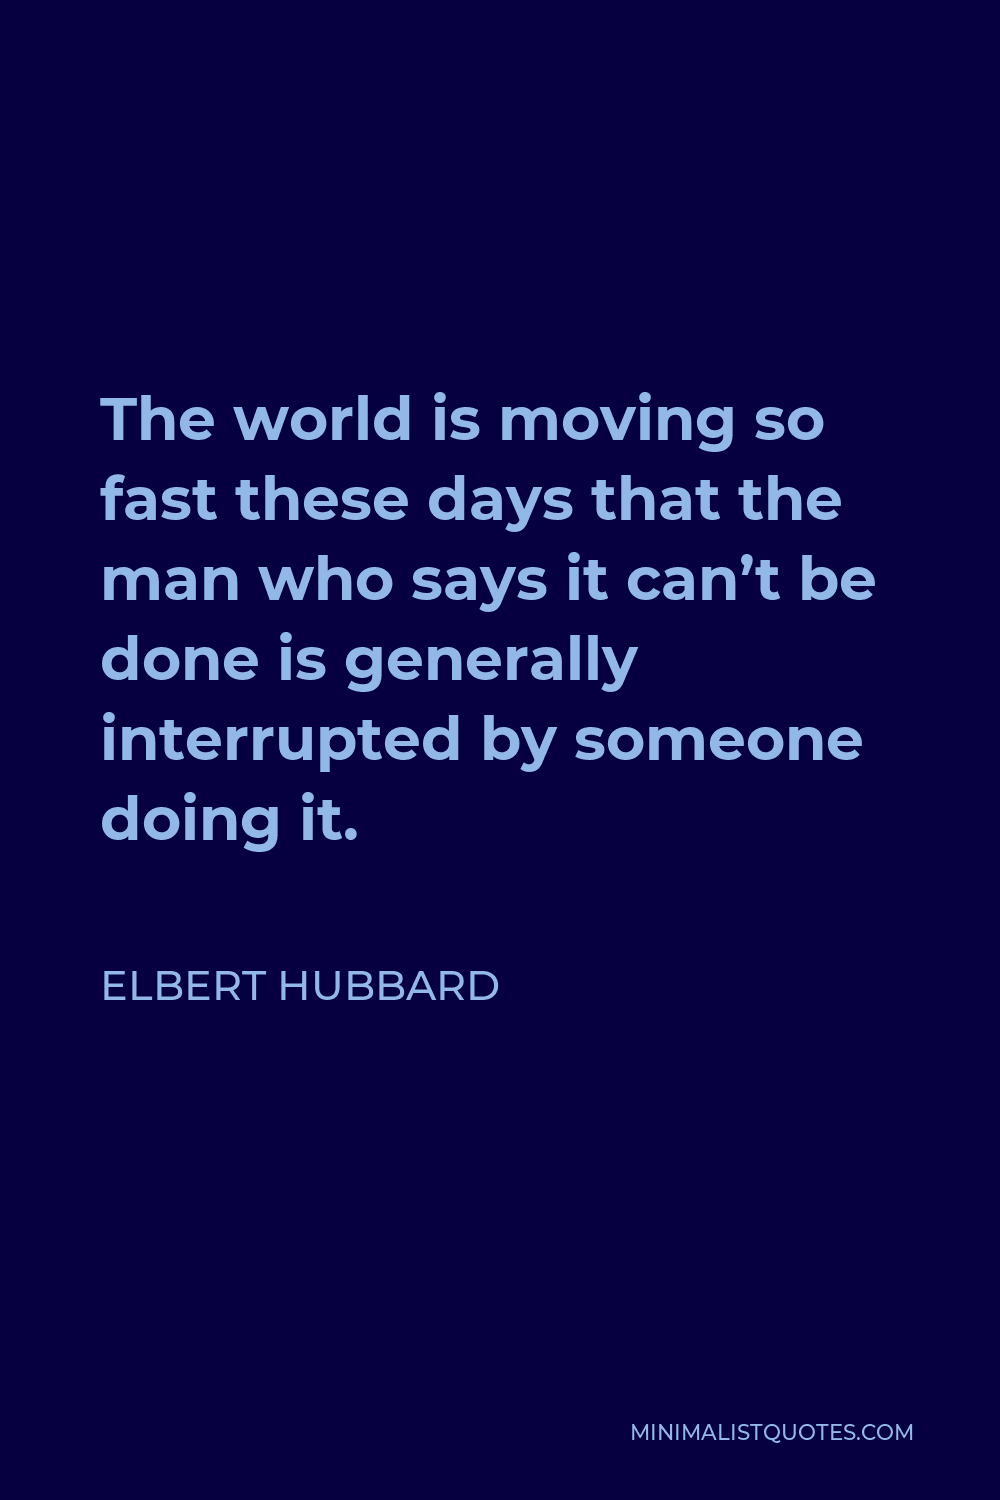 Elbert Hubbard Quote - The world is moving so fast these days that the man who says it can’t be done is generally interrupted by someone doing it.